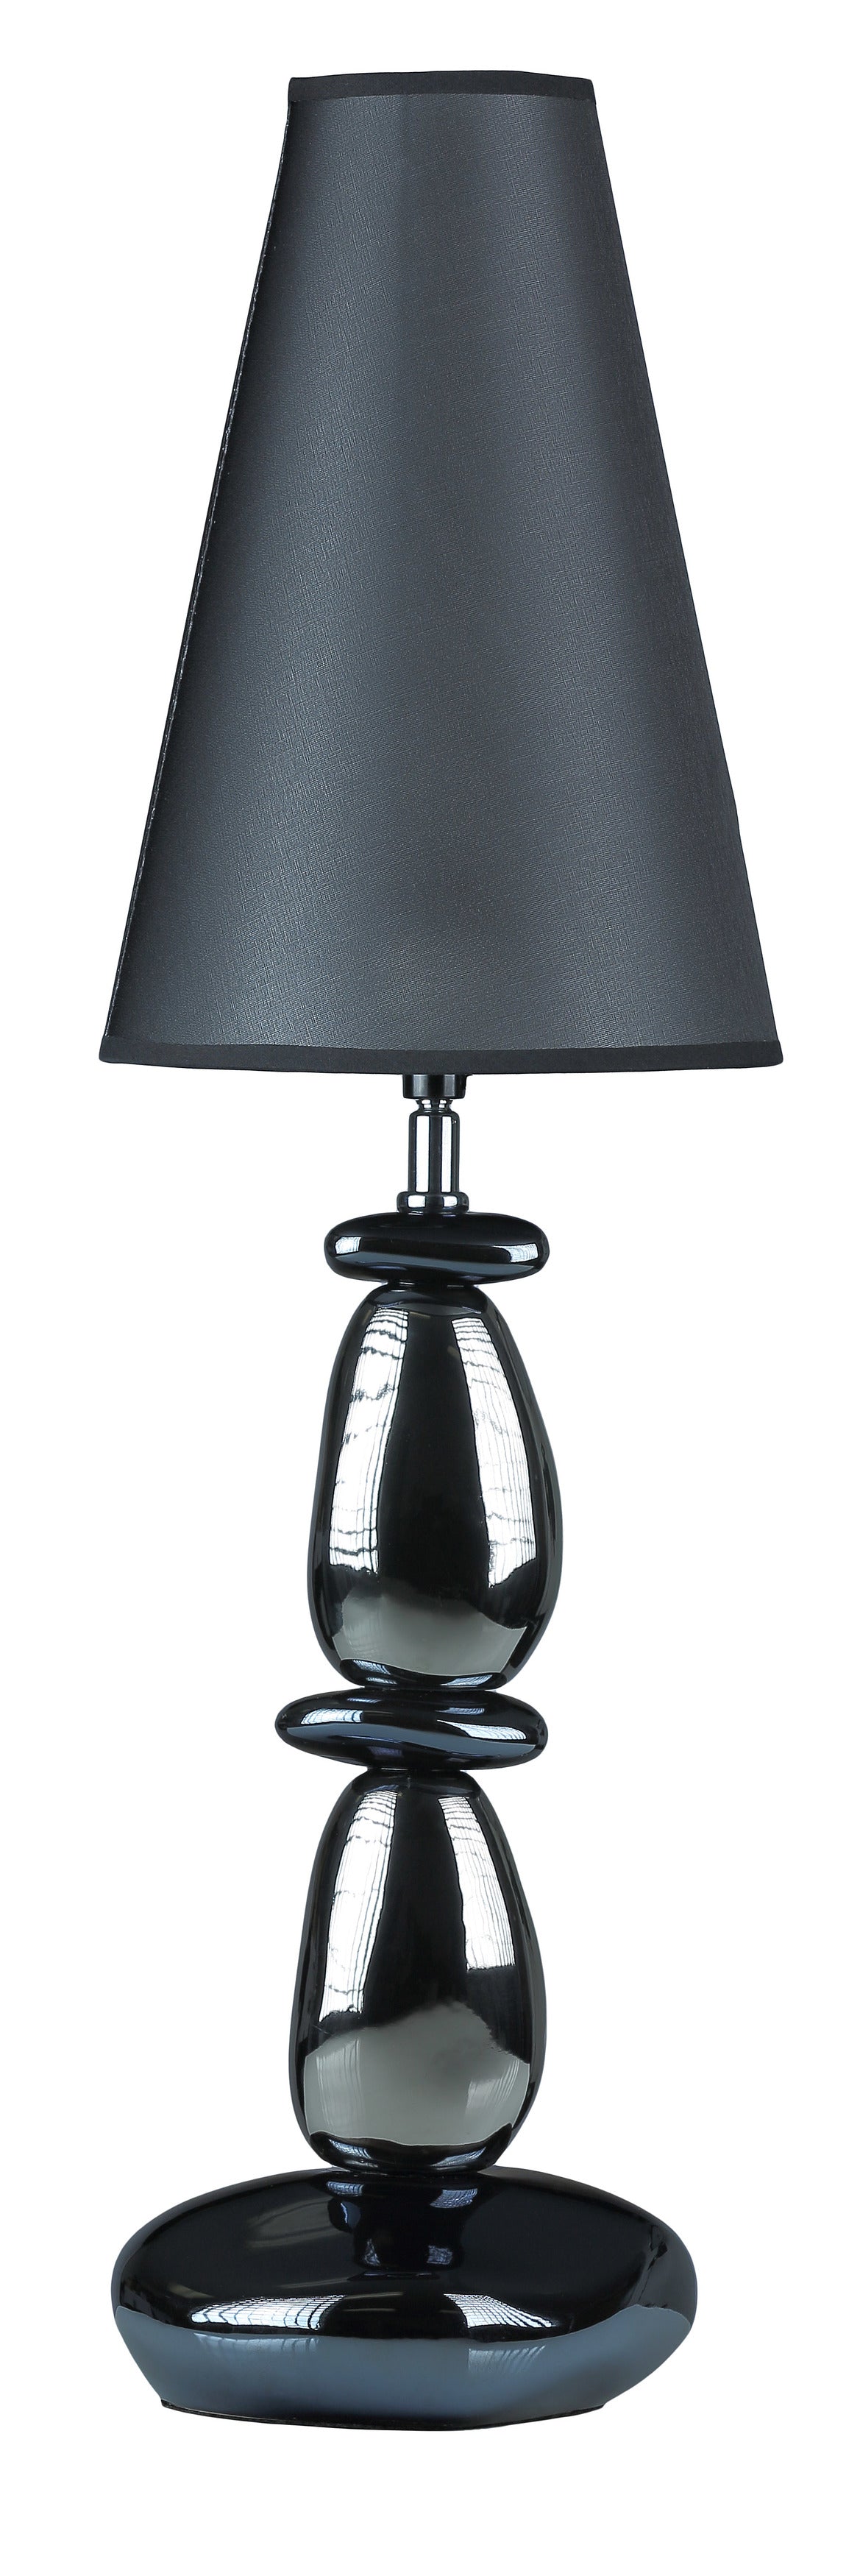 Cortesi Home Lava Table Lamp, Chrome and Blue with Black Shade